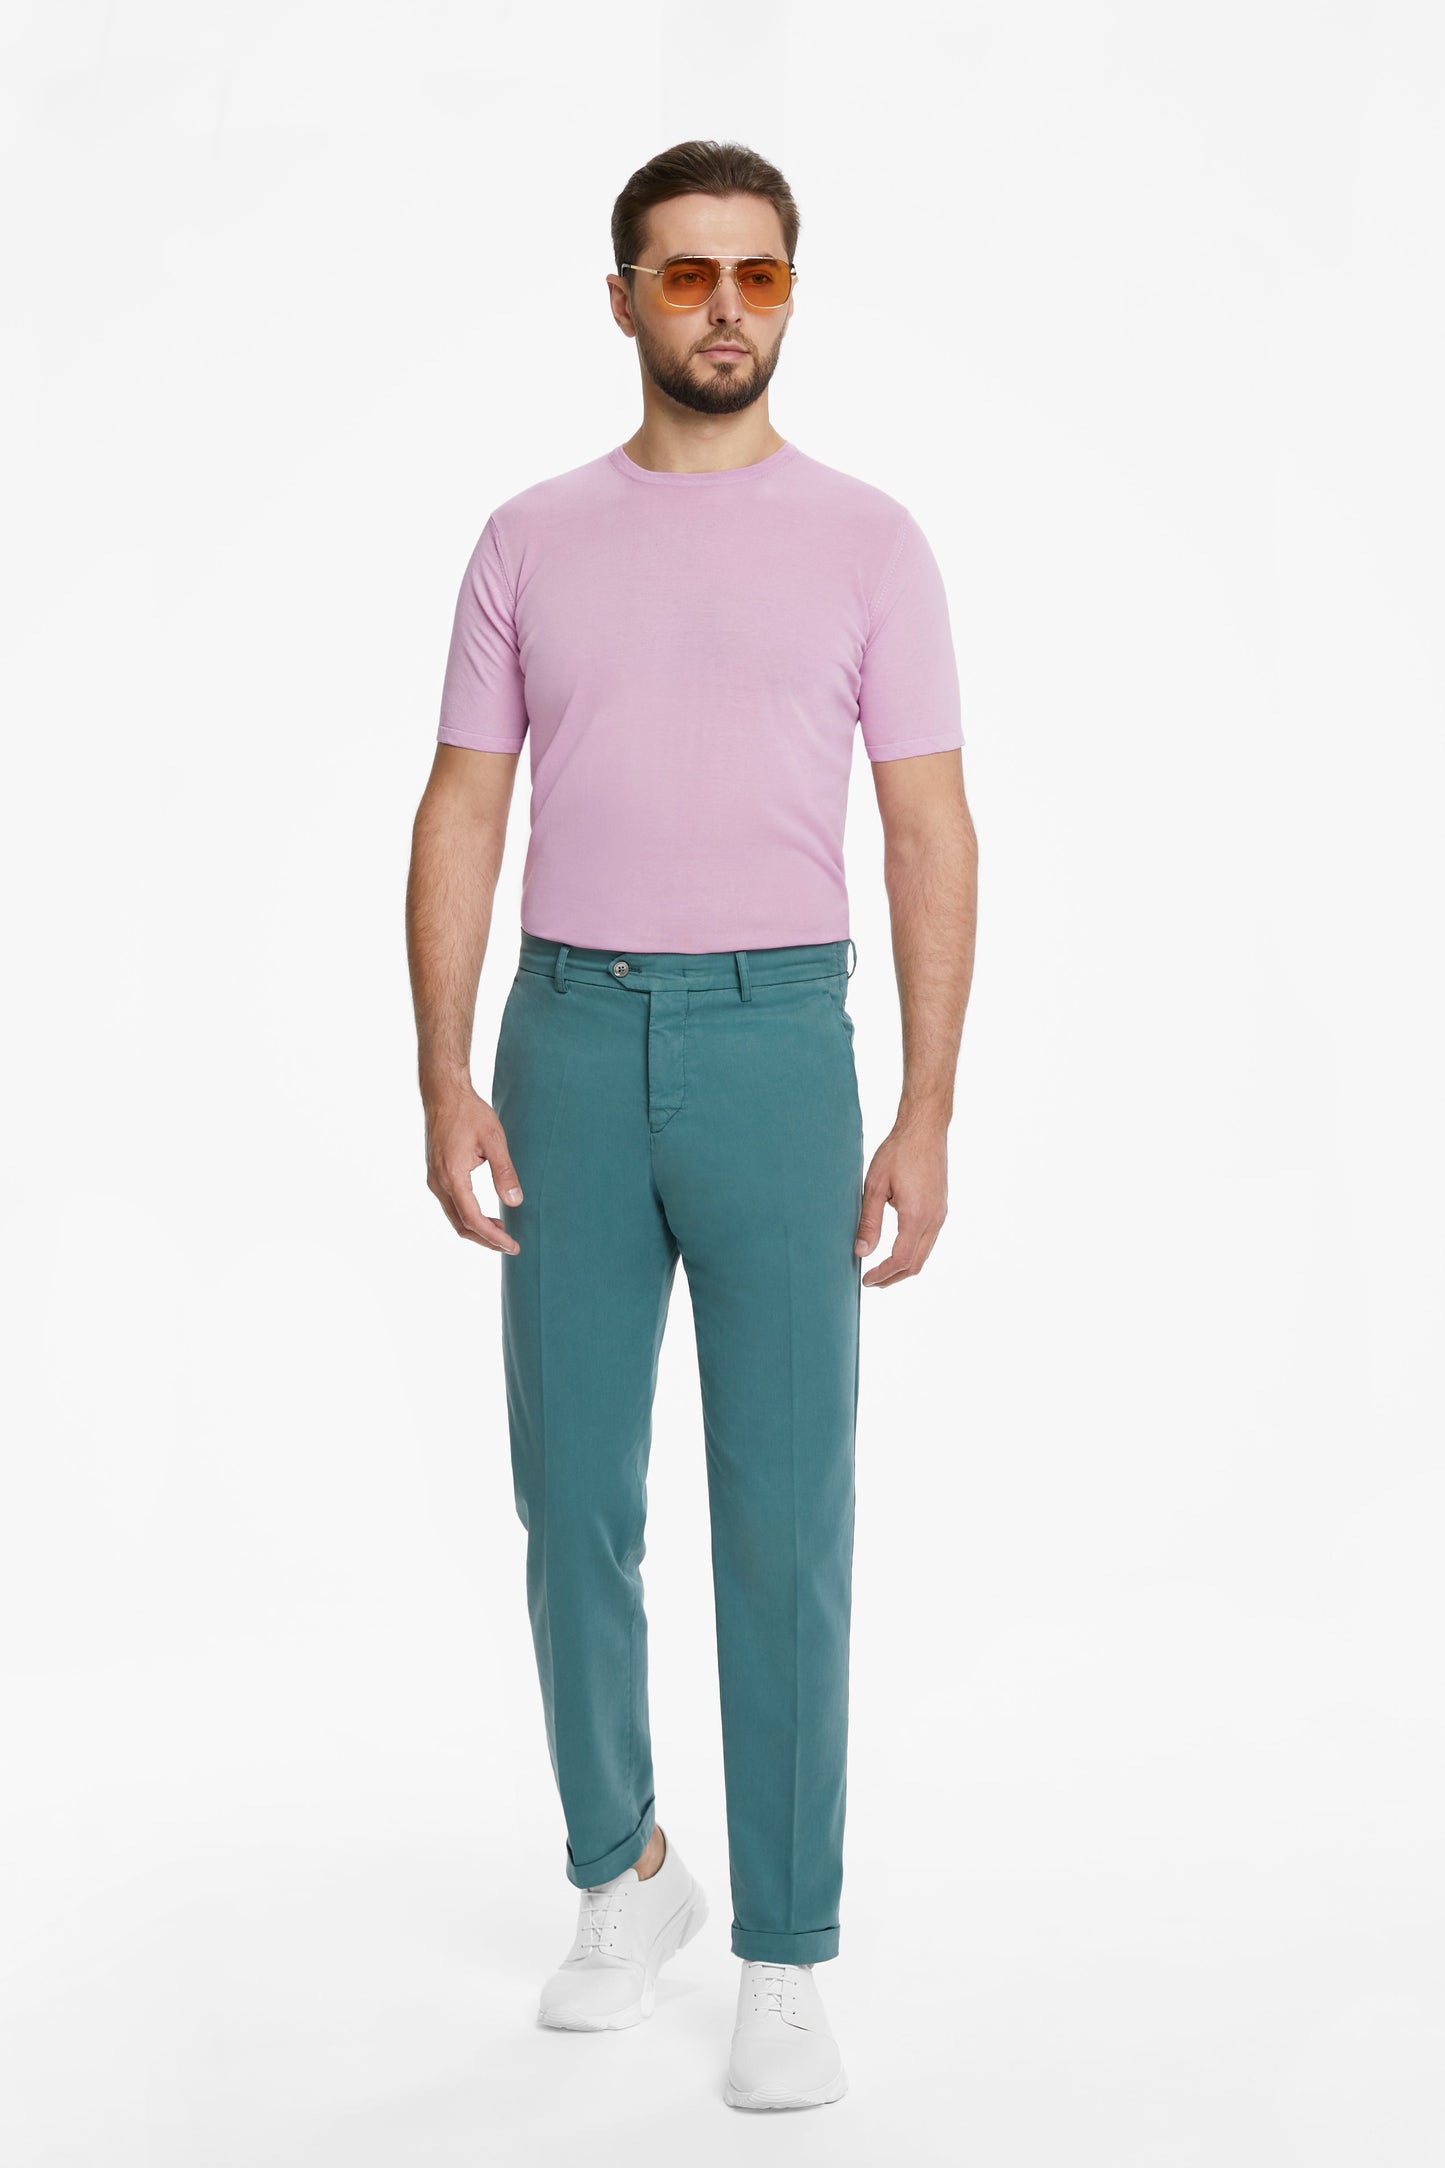 Turquoise CHINOS Trousers